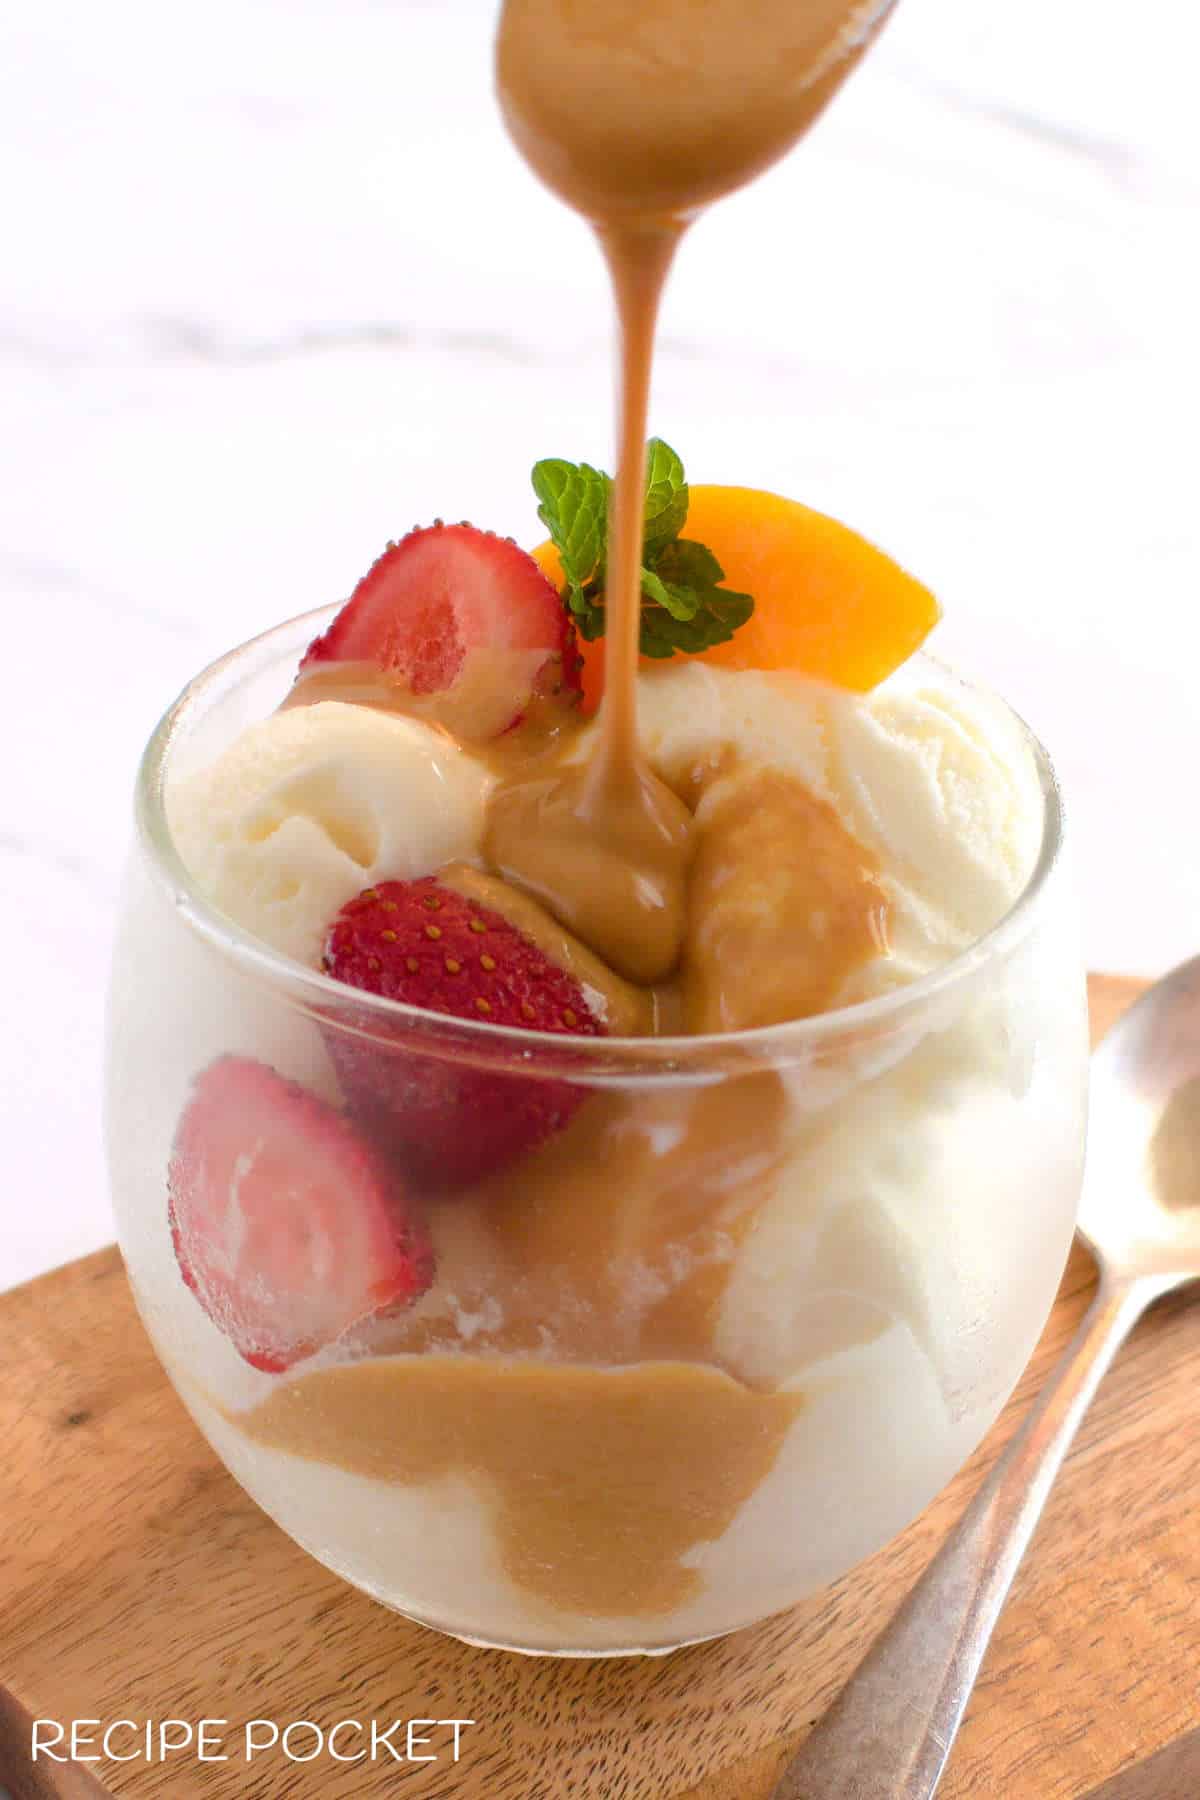 Featured image for article on how to make slow cooker dulce de leche. It show caramel sauce being poured over icecream.